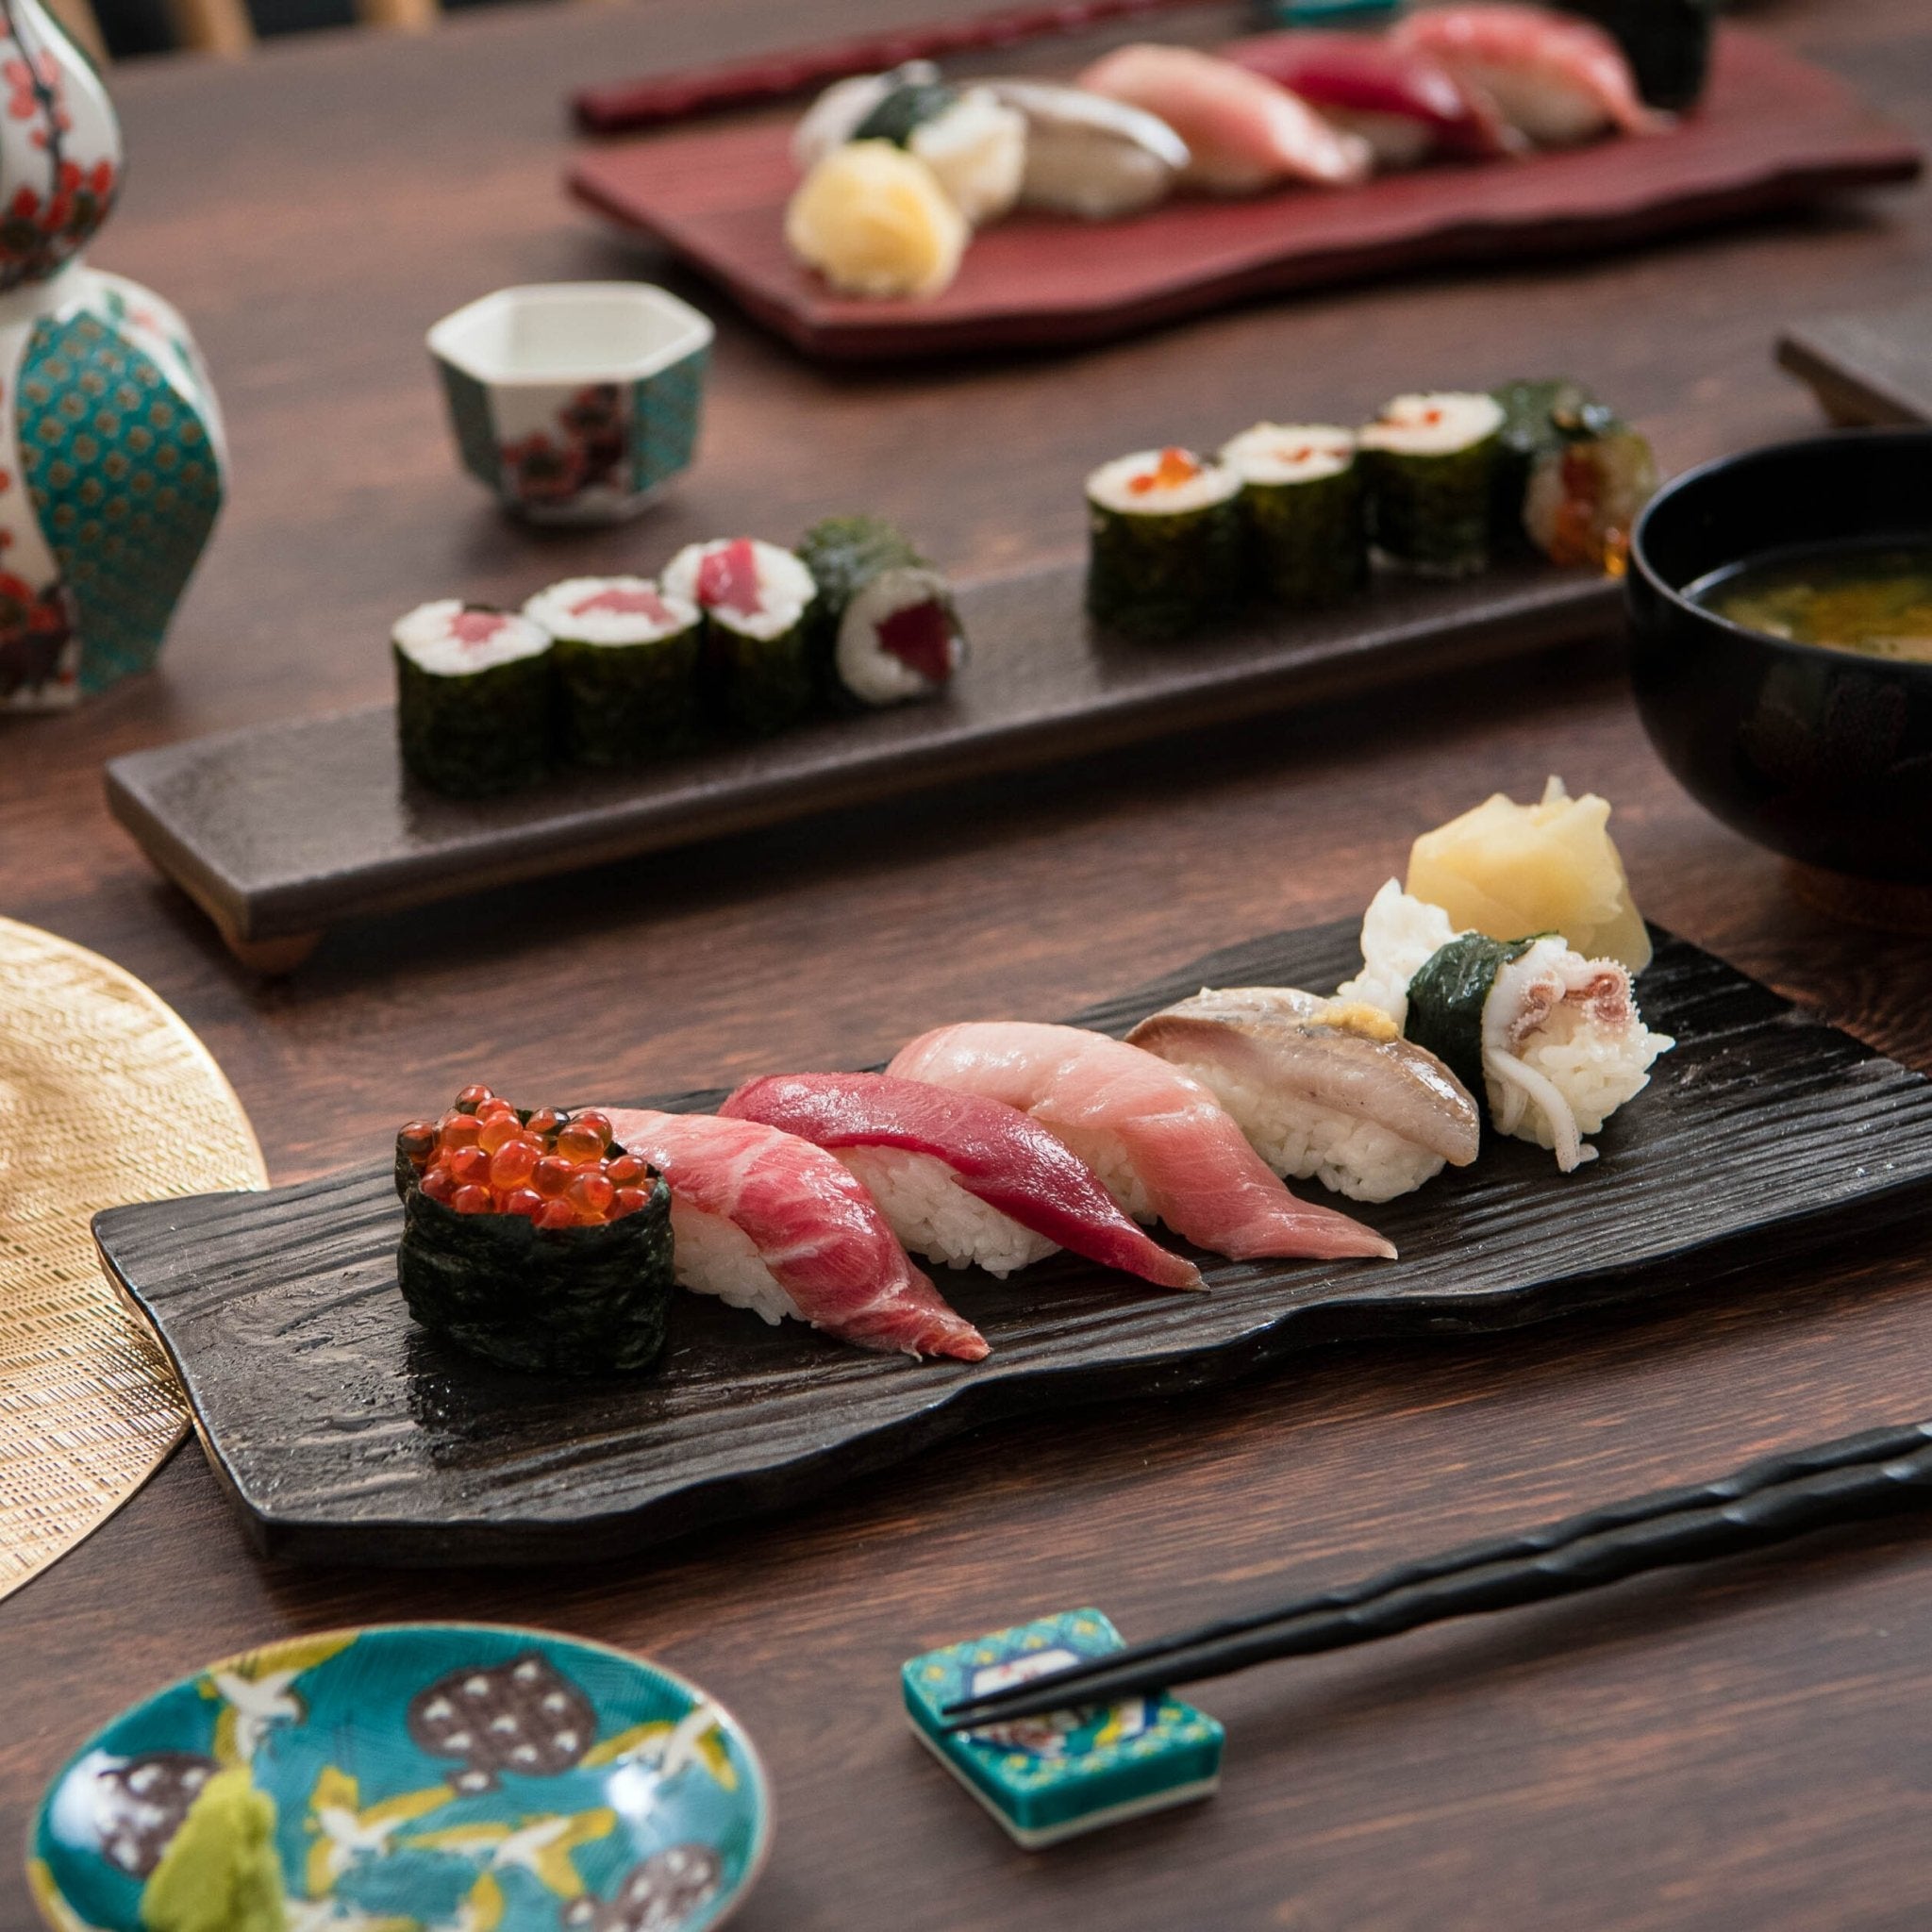 Cool Wares Sushi Making Tool Set  Makes Sushi Rolls Fun and Easy